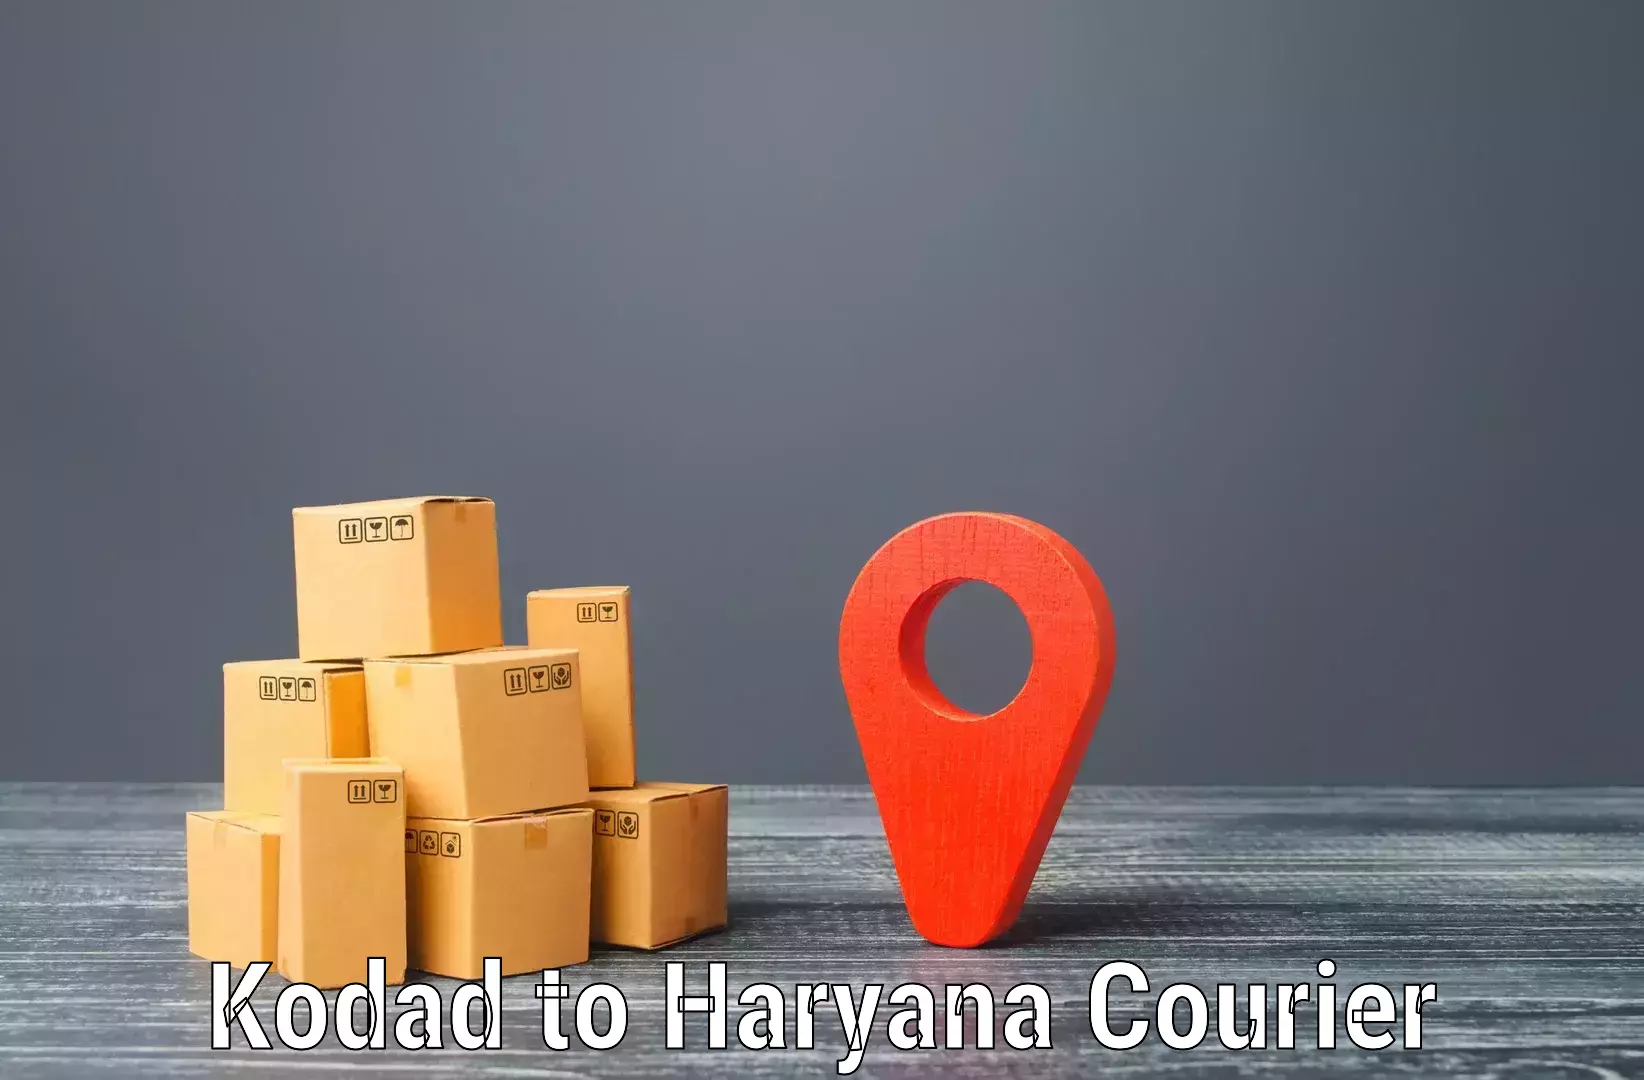 Customer-friendly courier services Kodad to NCR Haryana